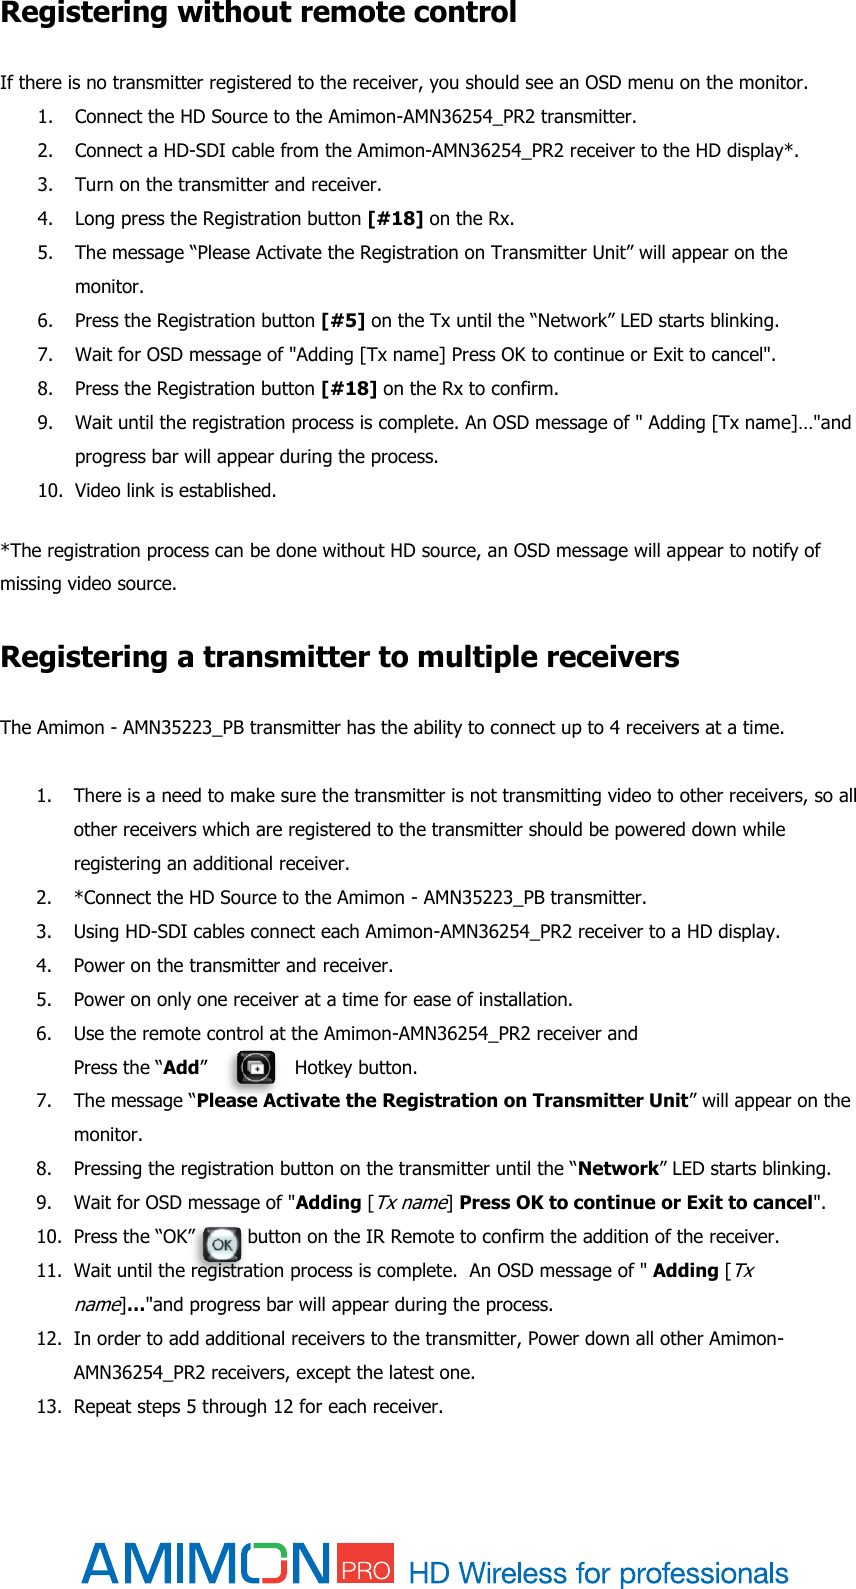  Registering without remote control If there is no transmitter registered to the receiver, you should see an OSD menu on the monitor. 1. Connect the HD Source to the Amimon-AMN36254_PR2 transmitter. 2. Connect a HD-SDI cable from the Amimon-AMN36254_PR2 receiver to the HD display*. 3. Turn on the transmitter and receiver. 4. Long press the Registration button [#18] on the Rx. 5. The message “Please Activate the Registration on Transmitter Unit” will appear on the monitor. 6. Press the Registration button [#5] on the Tx until the “Network” LED starts blinking. 7. Wait for OSD message of &quot;Adding [Tx name] Press OK to continue or Exit to cancel&quot;.  8. Press the Registration button [#18] on the Rx to confirm. 9. Wait until the registration process is complete. An OSD message of &quot; Adding [Tx name]…&quot;and progress bar will appear during the process. 10. Video link is established.  *The registration process can be done without HD source, an OSD message will appear to notify of missing video source.  Registering a transmitter to multiple receivers  The Amimon - AMN35223_PB transmitter has the ability to connect up to 4 receivers at a time.   1. There is a need to make sure the transmitter is not transmitting video to other receivers, so all other receivers which are registered to the transmitter should be powered down while registering an additional receiver.  2. *Connect the HD Source to the Amimon - AMN35223_PB transmitter. 3. Using HD-SDI cables connect each Amimon-AMN36254_PR2 receiver to a HD display. 4. Power on the transmitter and receiver. 5. Power on only one receiver at a time for ease of installation. 6. Use the remote control at the Amimon-AMN36254_PR2 receiver and  Press the “Add”               Hotkey button.  7. The message “Please Activate the Registration on Transmitter Unit” will appear on the monitor. 8. Pressing the registration button on the transmitter until the “Network” LED starts blinking. 9. Wait for OSD message of &quot;Adding [Tx name] Press OK to continue or Exit to cancel&quot;. 10. Press the “OK”         button on the IR Remote to confirm the addition of the receiver. 11. Wait until the registration process is complete.  An OSD message of &quot; Adding [Tx name]…&quot;and progress bar will appear during the process. 12. In order to add additional receivers to the transmitter, Power down all other Amimon-AMN36254_PR2 receivers, except the latest one. 13. Repeat steps 5 through 12 for each receiver. 